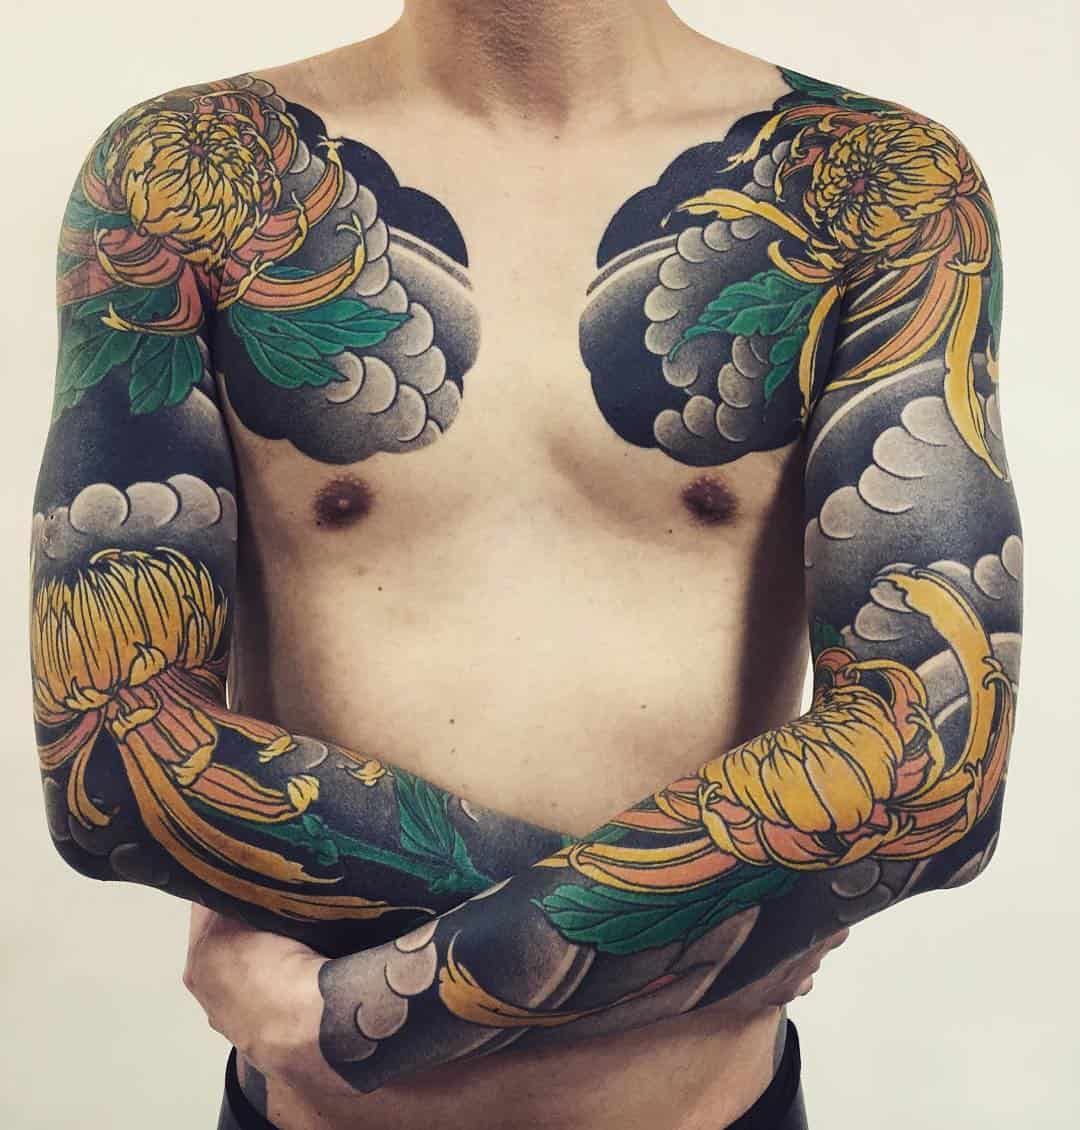 27 Japanese Ink Designs That Blend Trend and Tradition